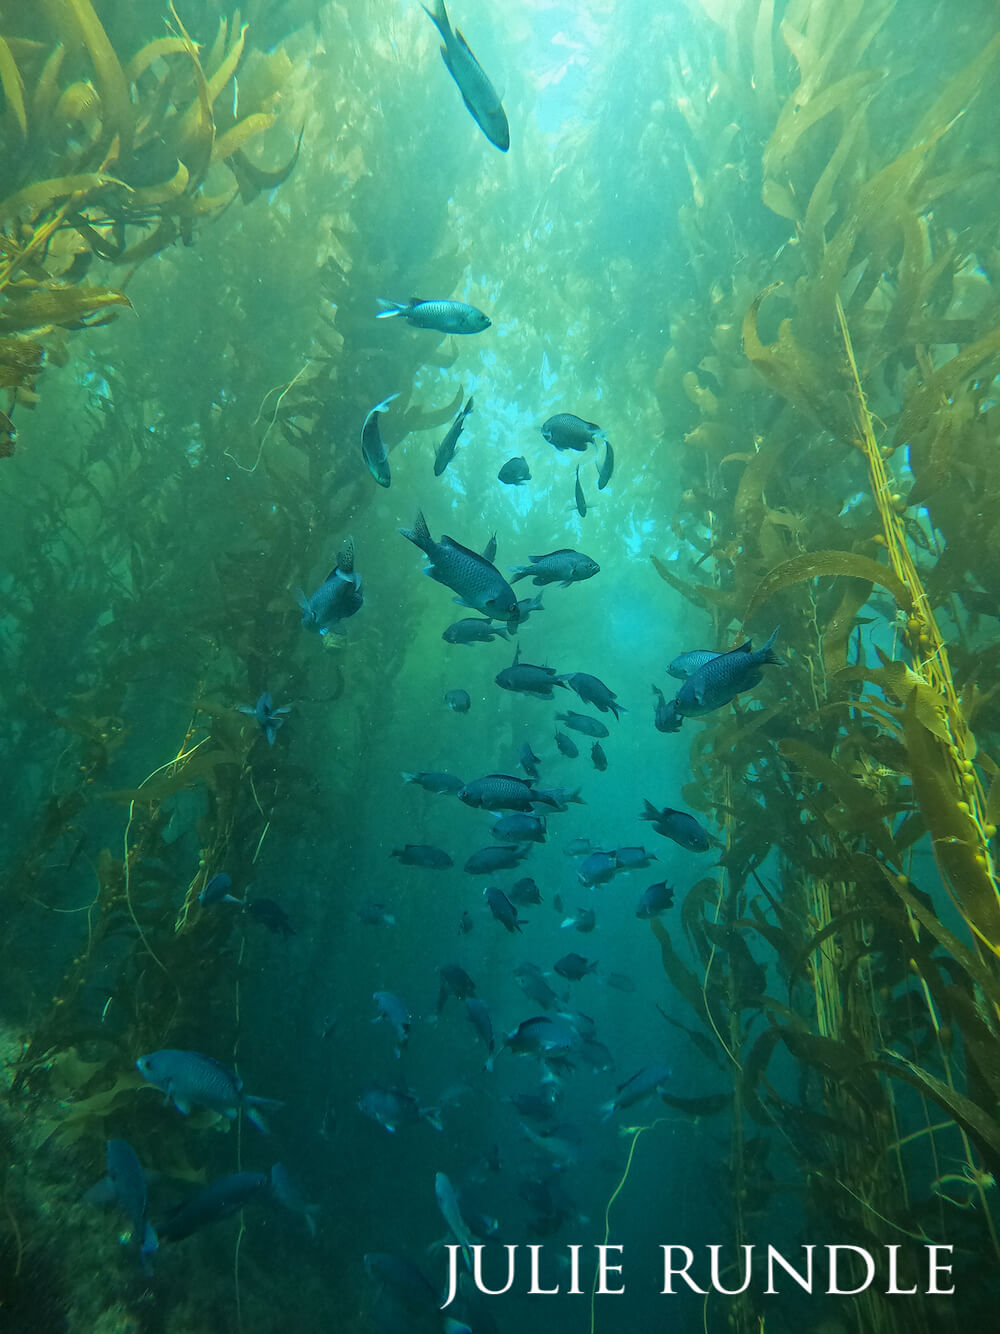 Congregation of blacksmith damselfish darting about a kelp forest.